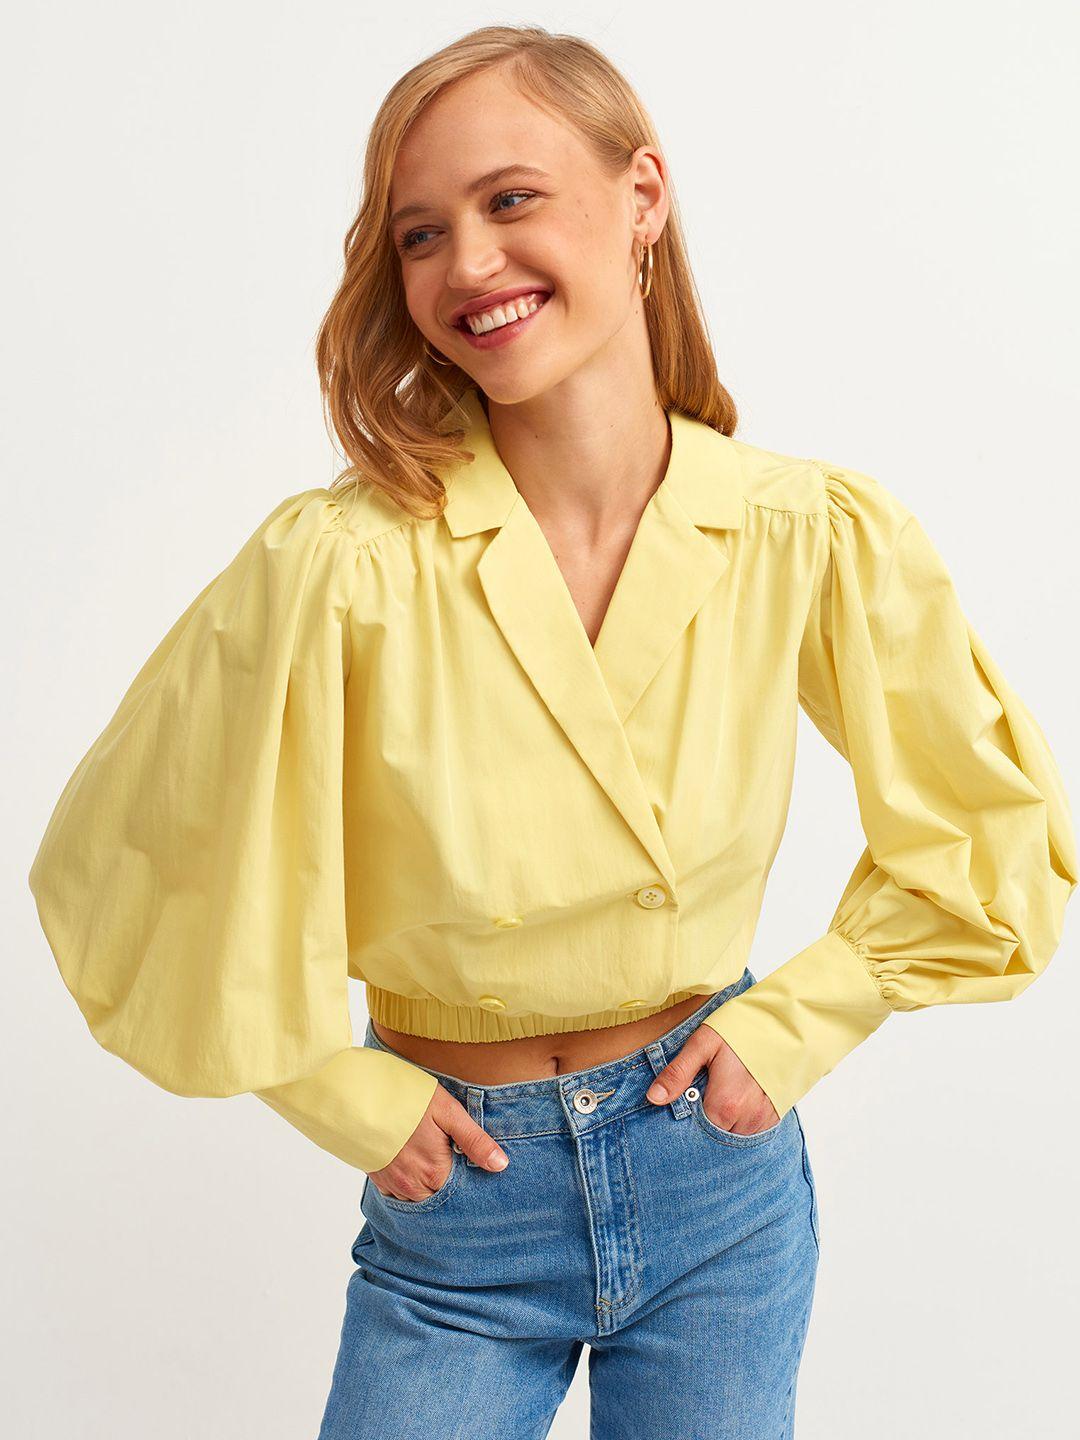 oxxo women yellow solid shirt style crop top